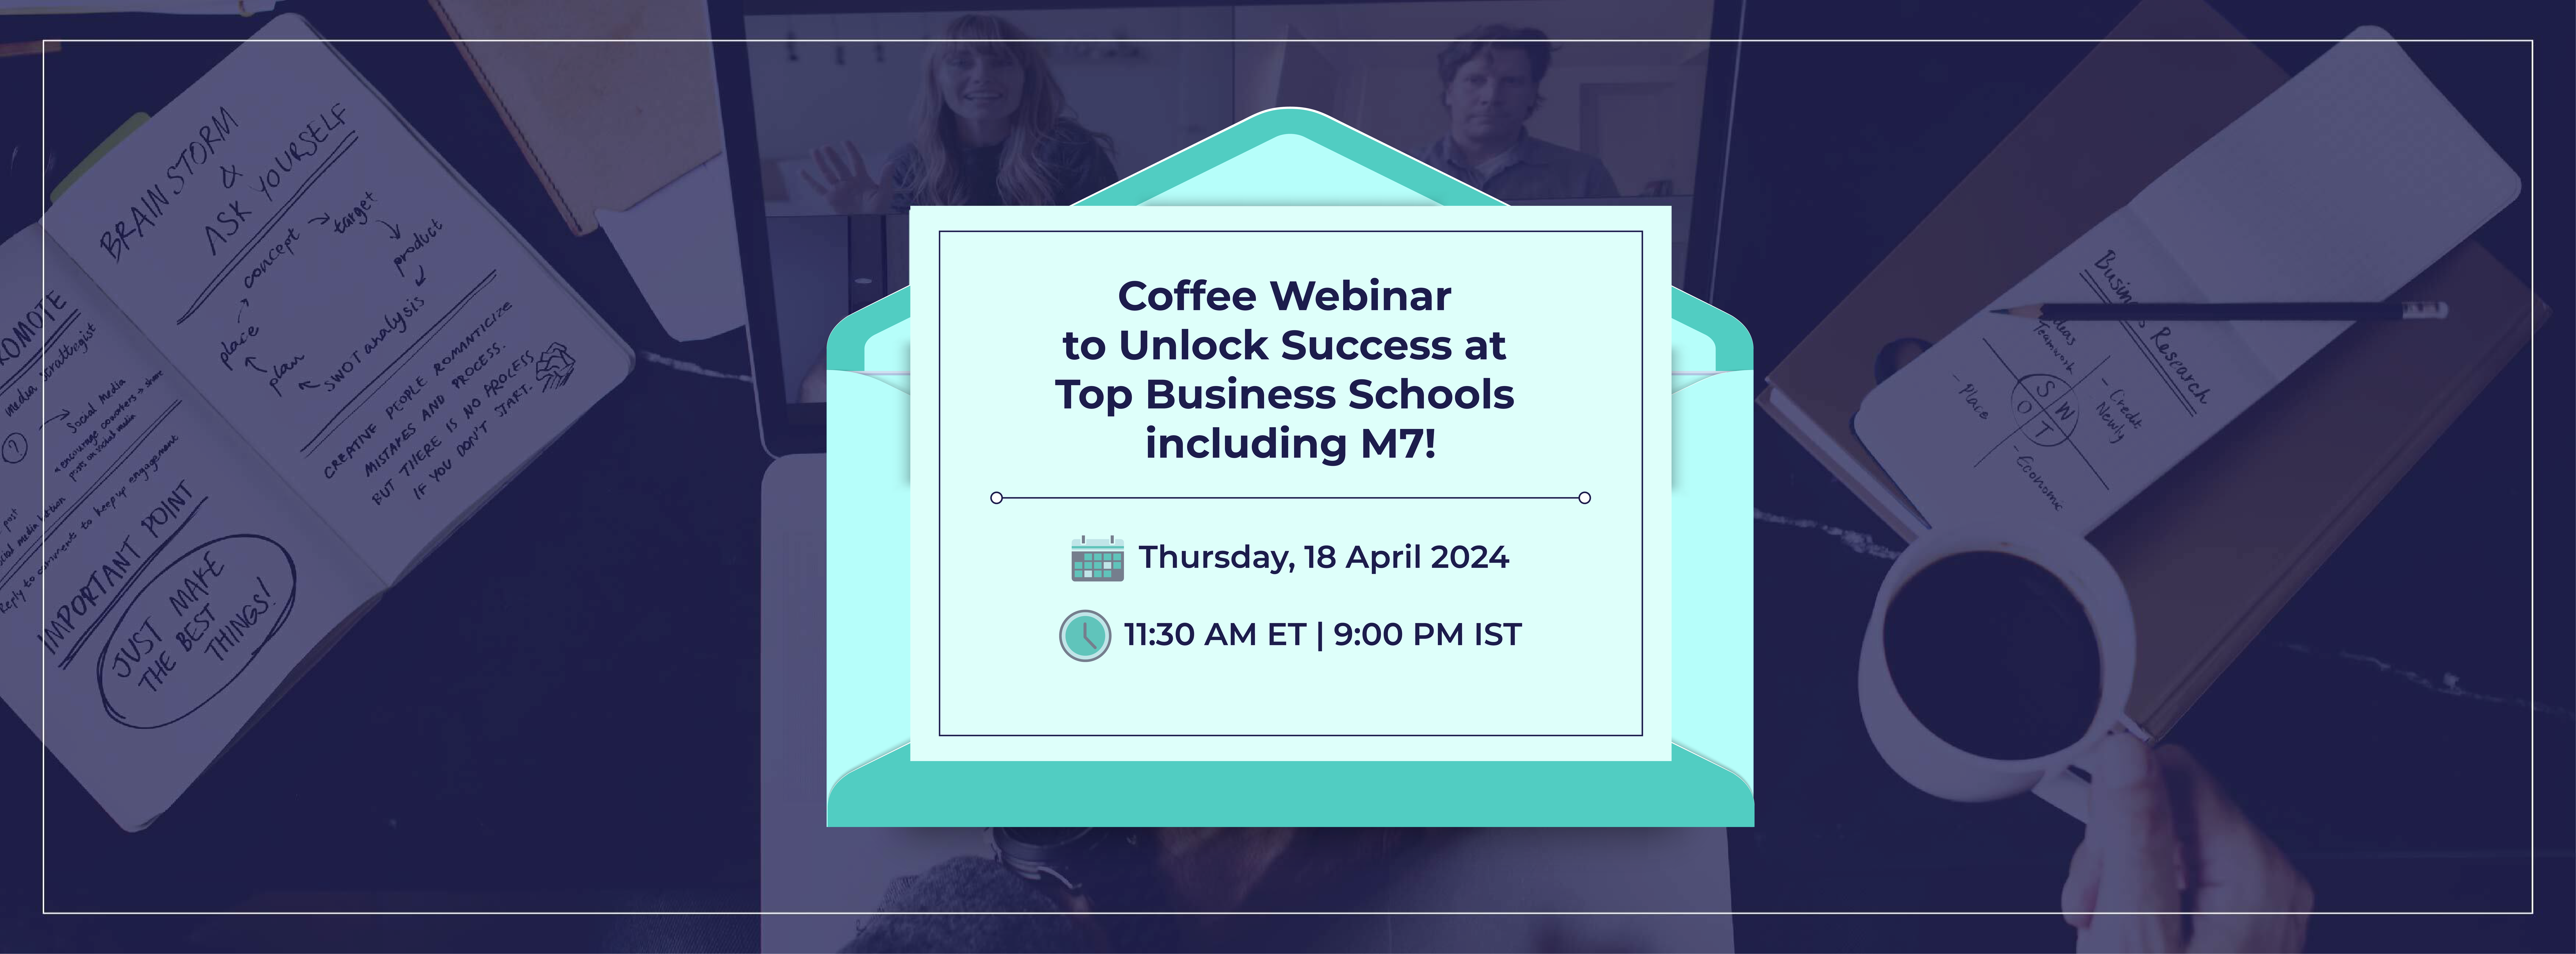 Free Coffee Webinar to Unlock Success at Top Business Schools including M7!